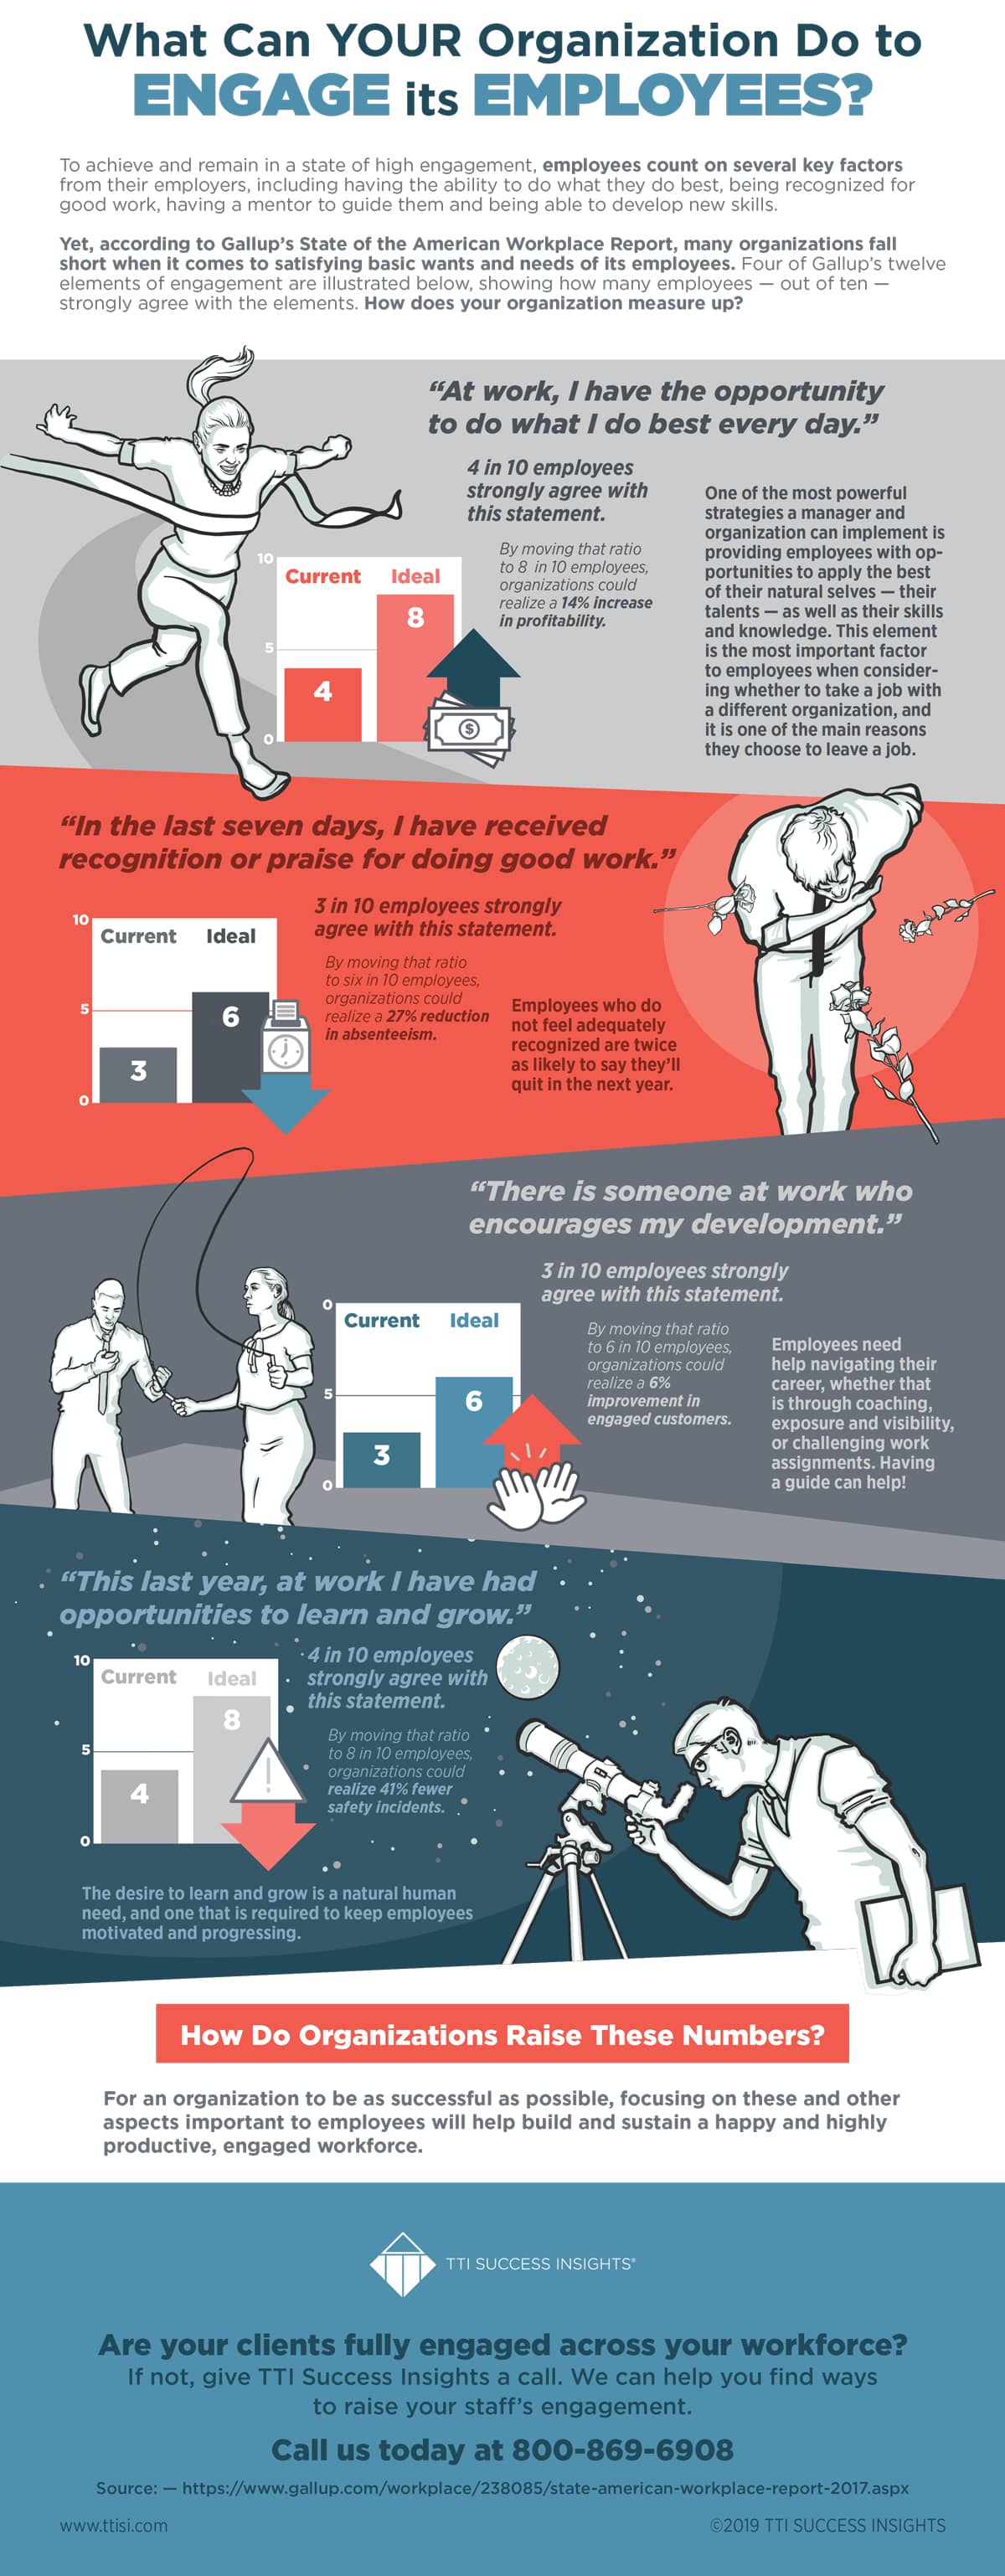 What Can Your Organization Do to Engage its Employees? Infographic